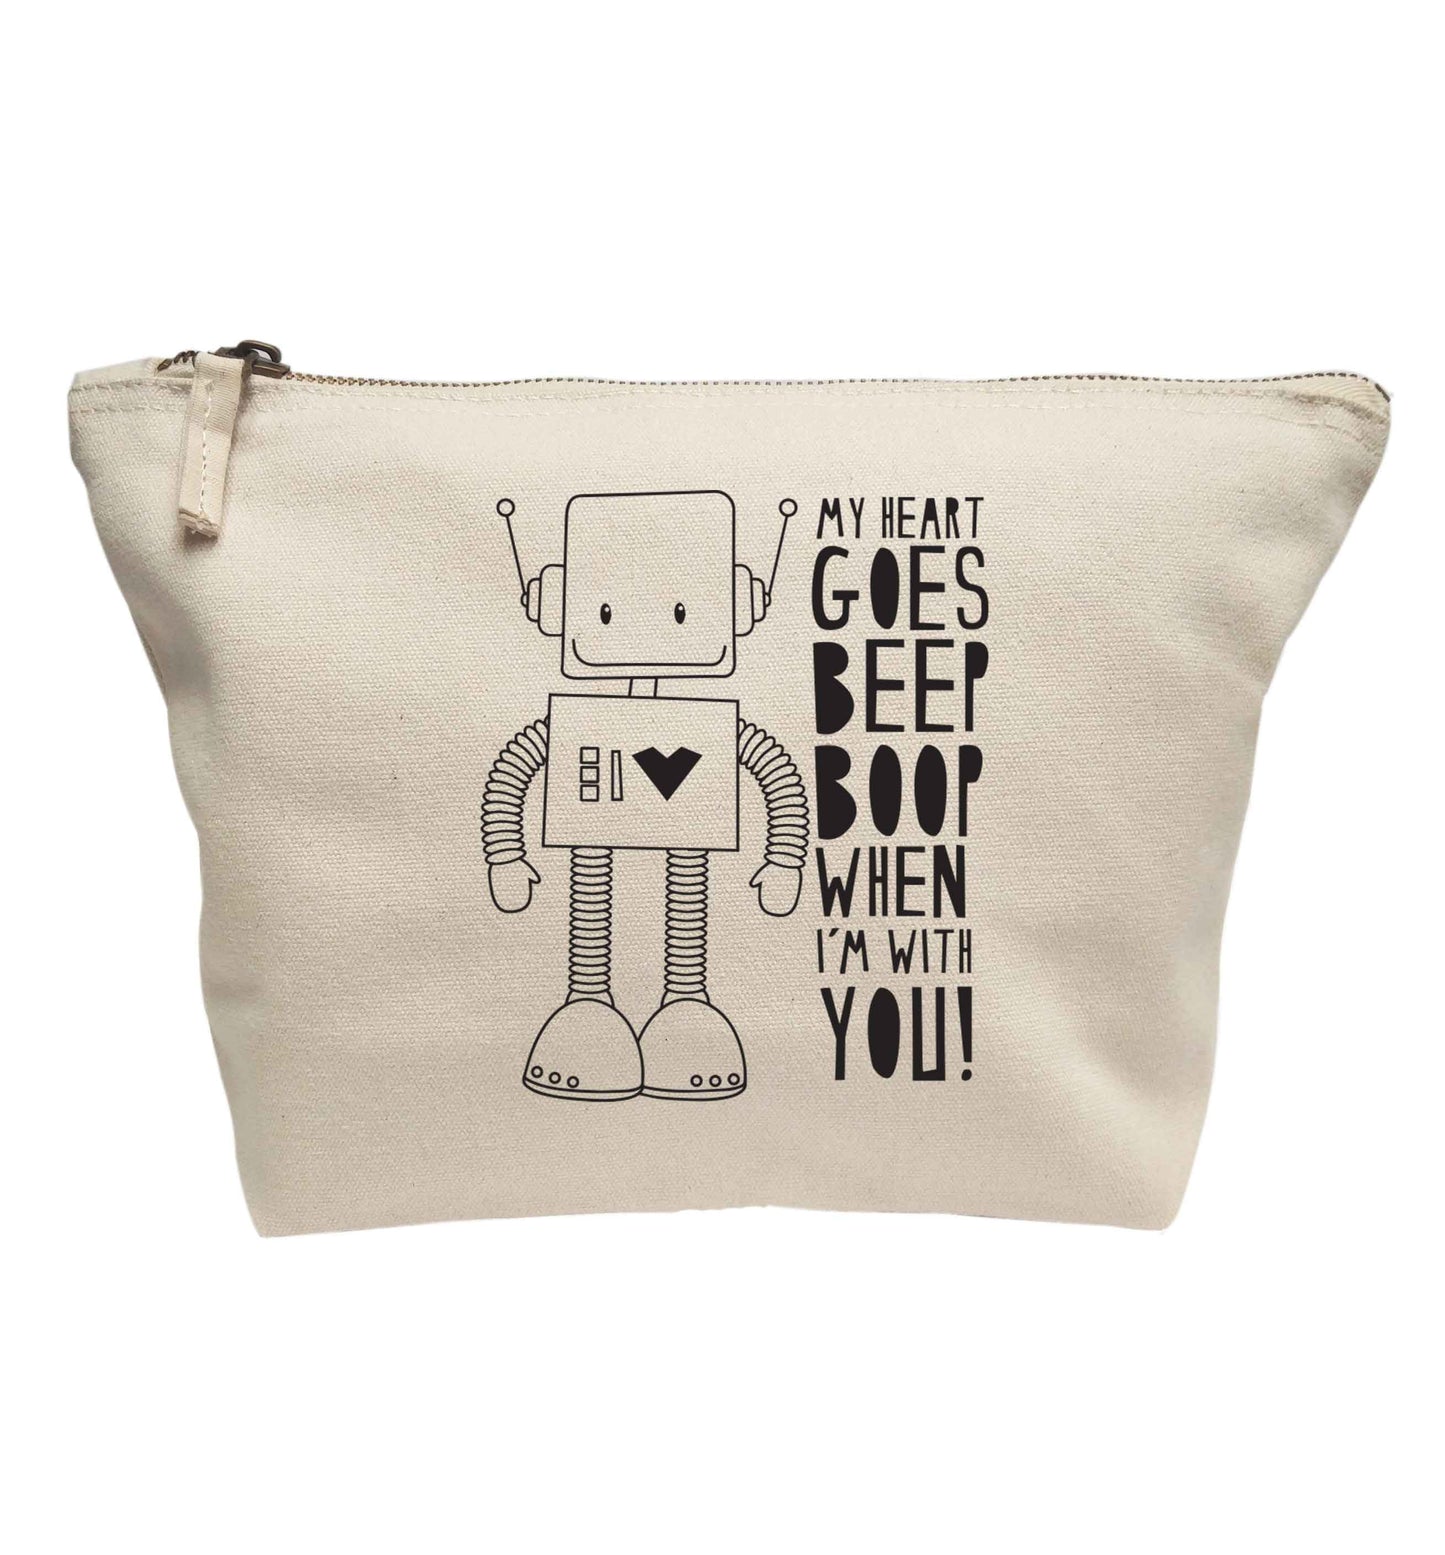 My heart goes beep boop when I'm with you | Makeup / wash bag